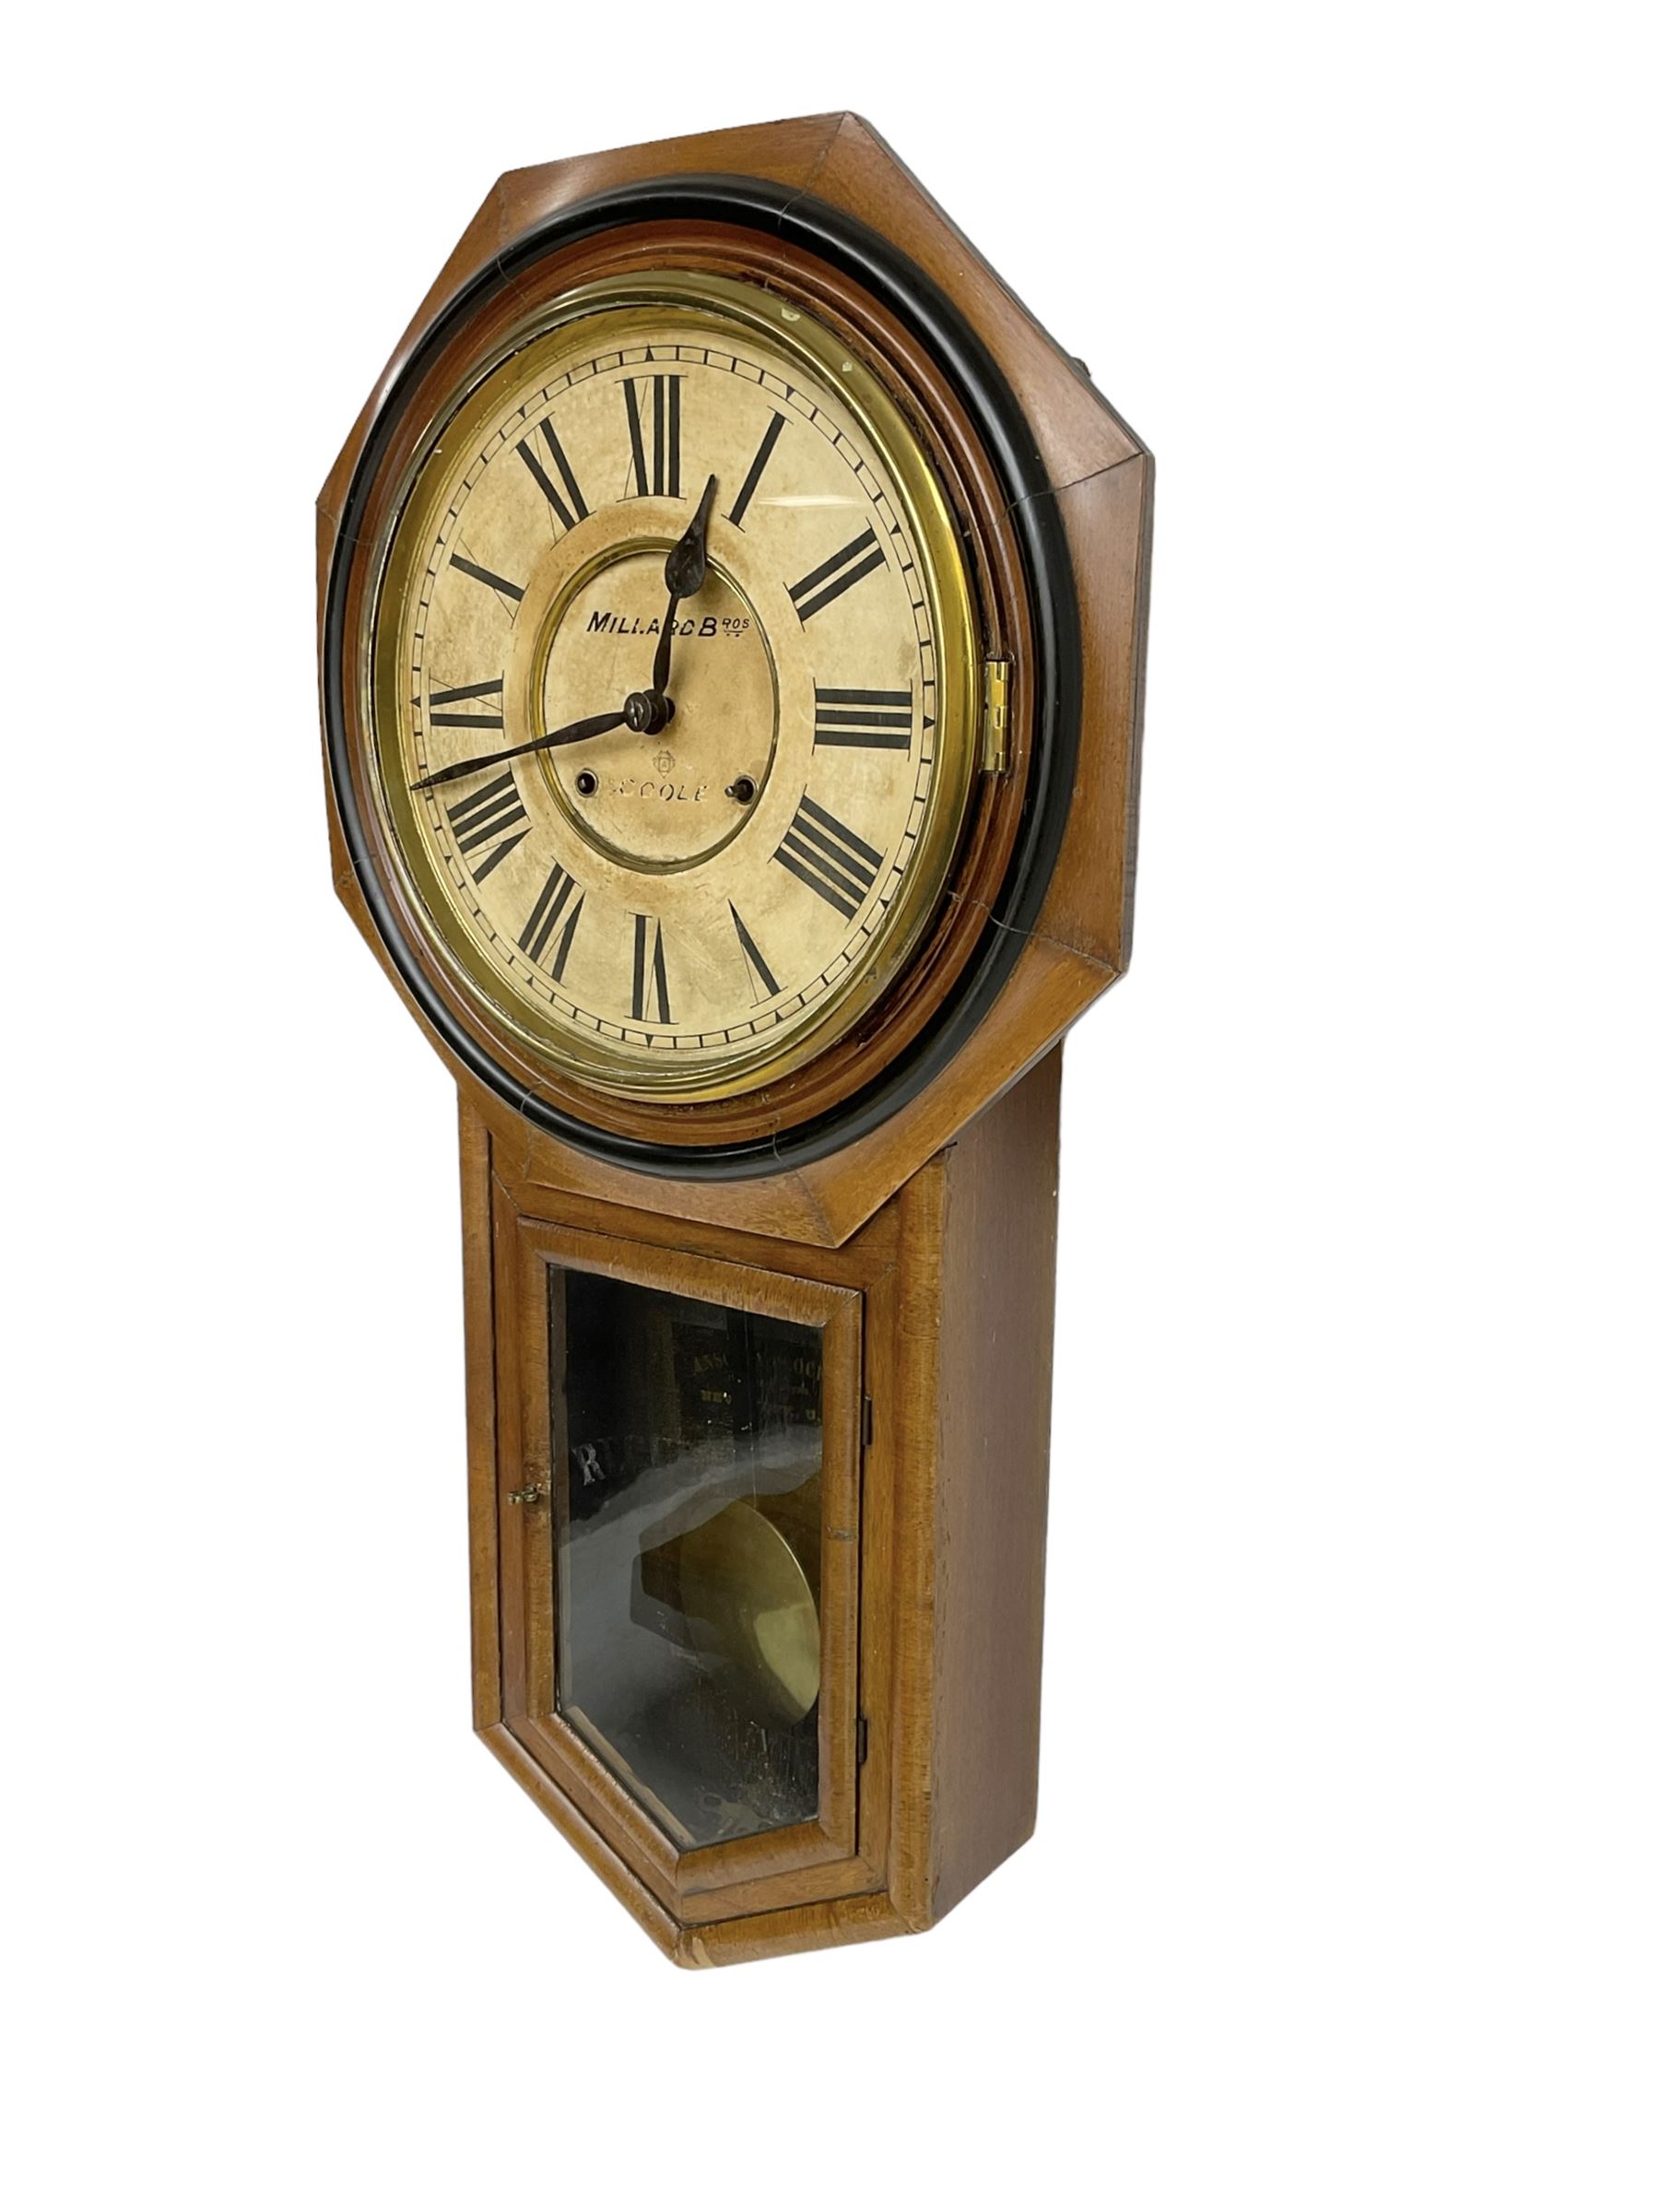 American - 19th century Ansonia drop dial wall clock 12 inch dial. - Image 2 of 4